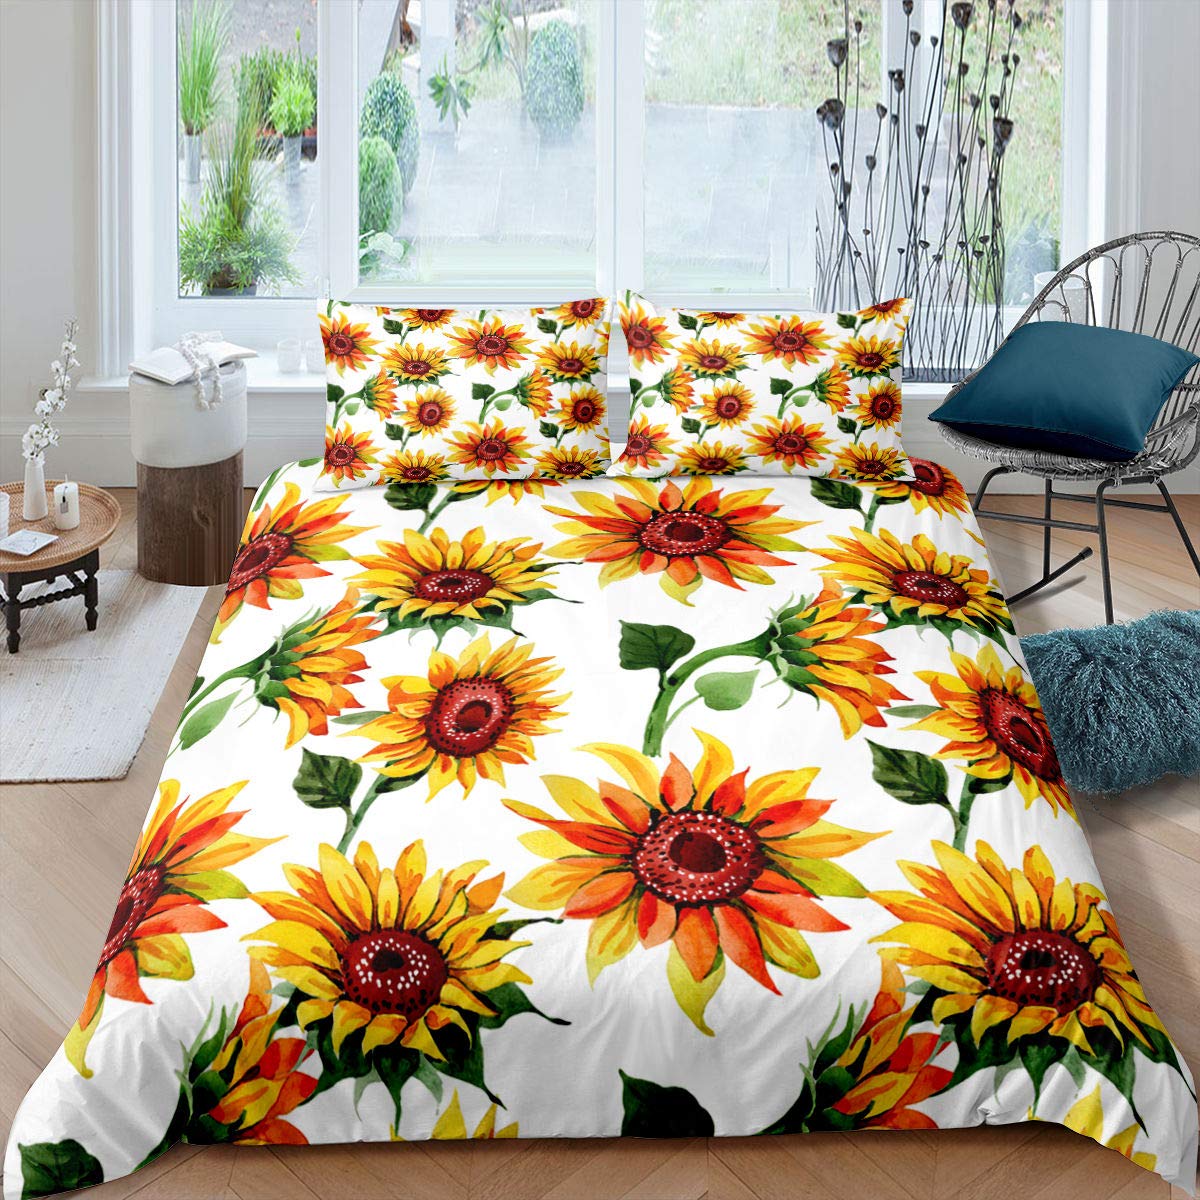 Sunflower Bedding Set Tropical Floral Printed Comforter Cover Warm Natural Theme Duvet Cover Yellow Blossom Pattern Bedspread Green Leaves Decor Oi...